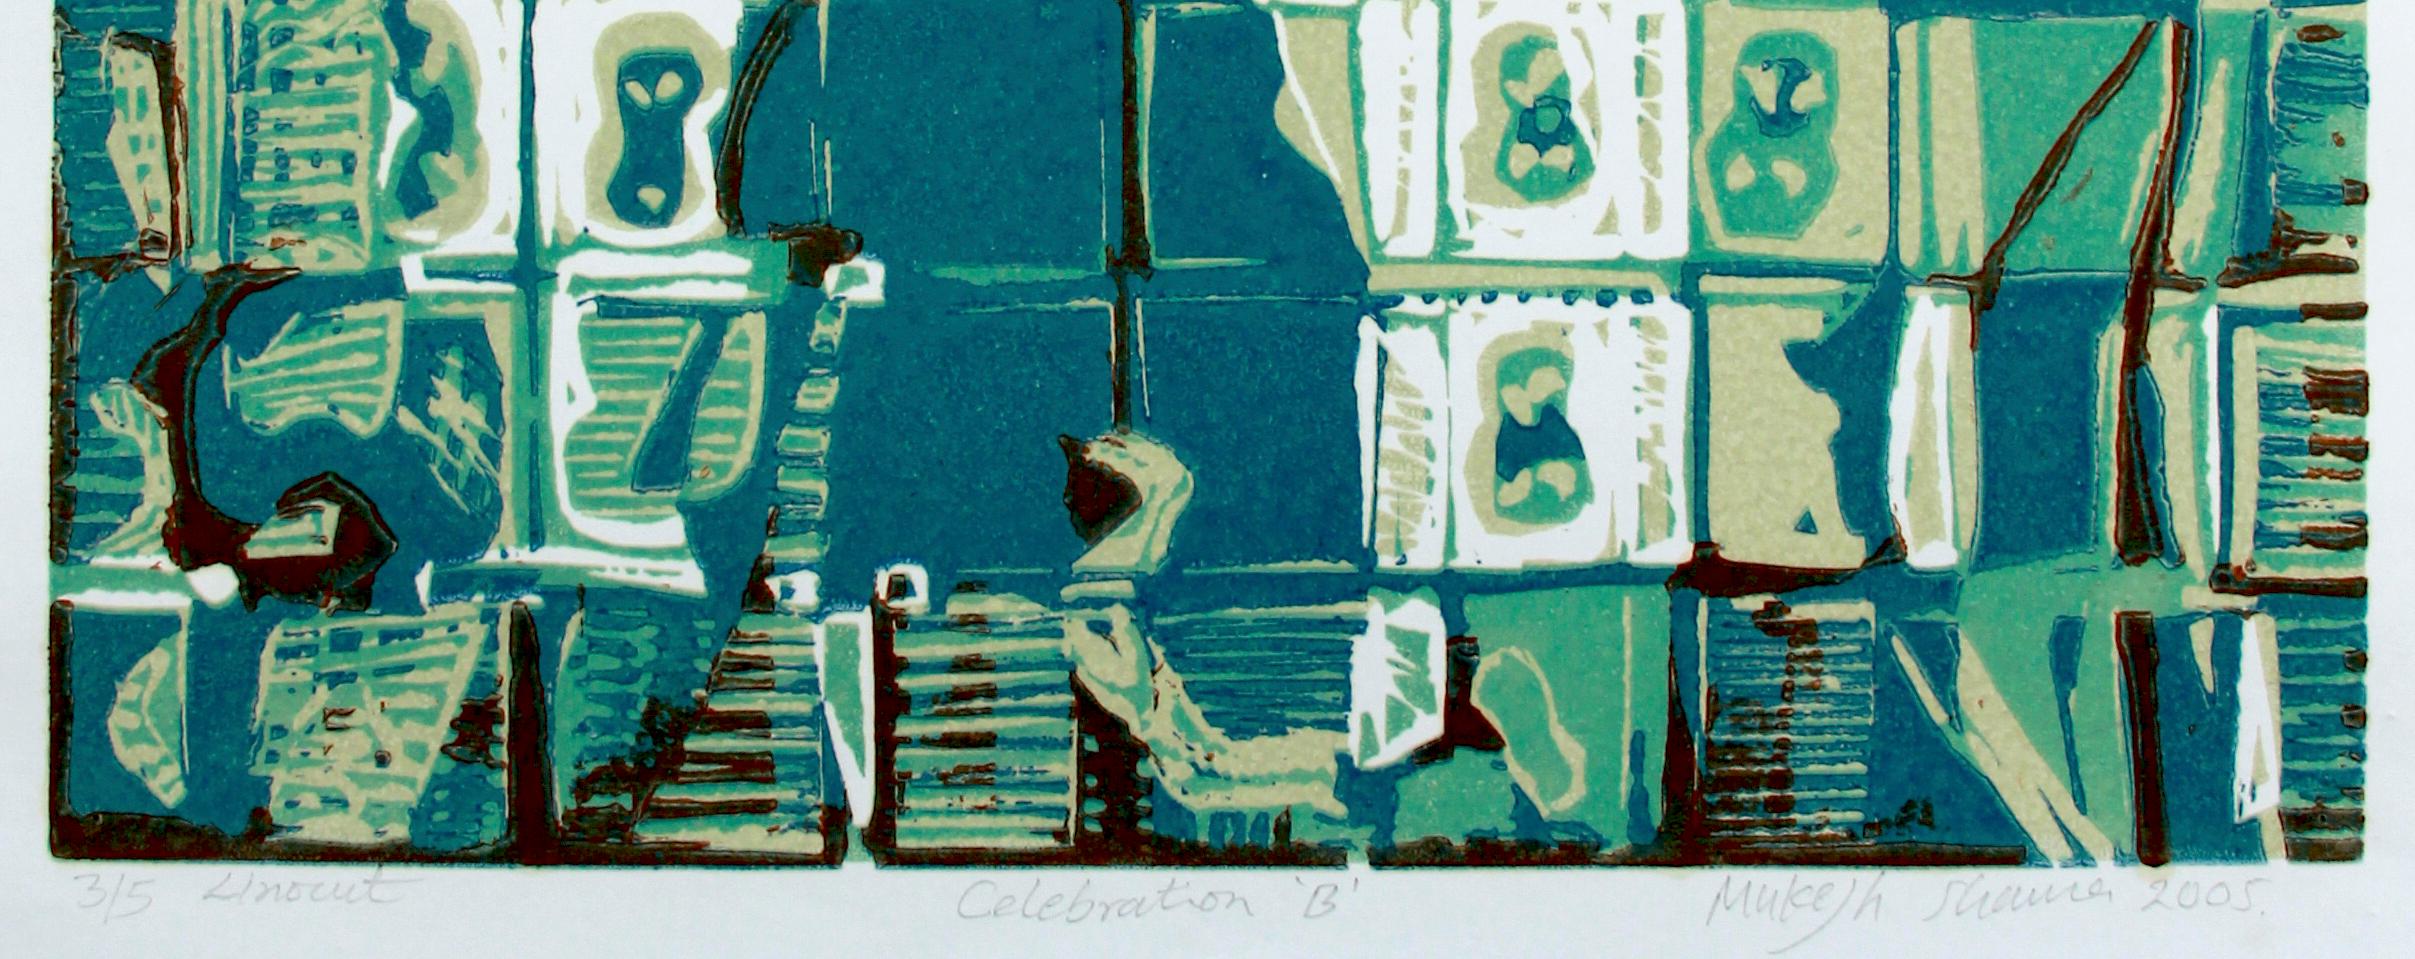 Abstract India Edition 3/5 Linocut Print Green Blue Turquoise Architectural For Sale 4